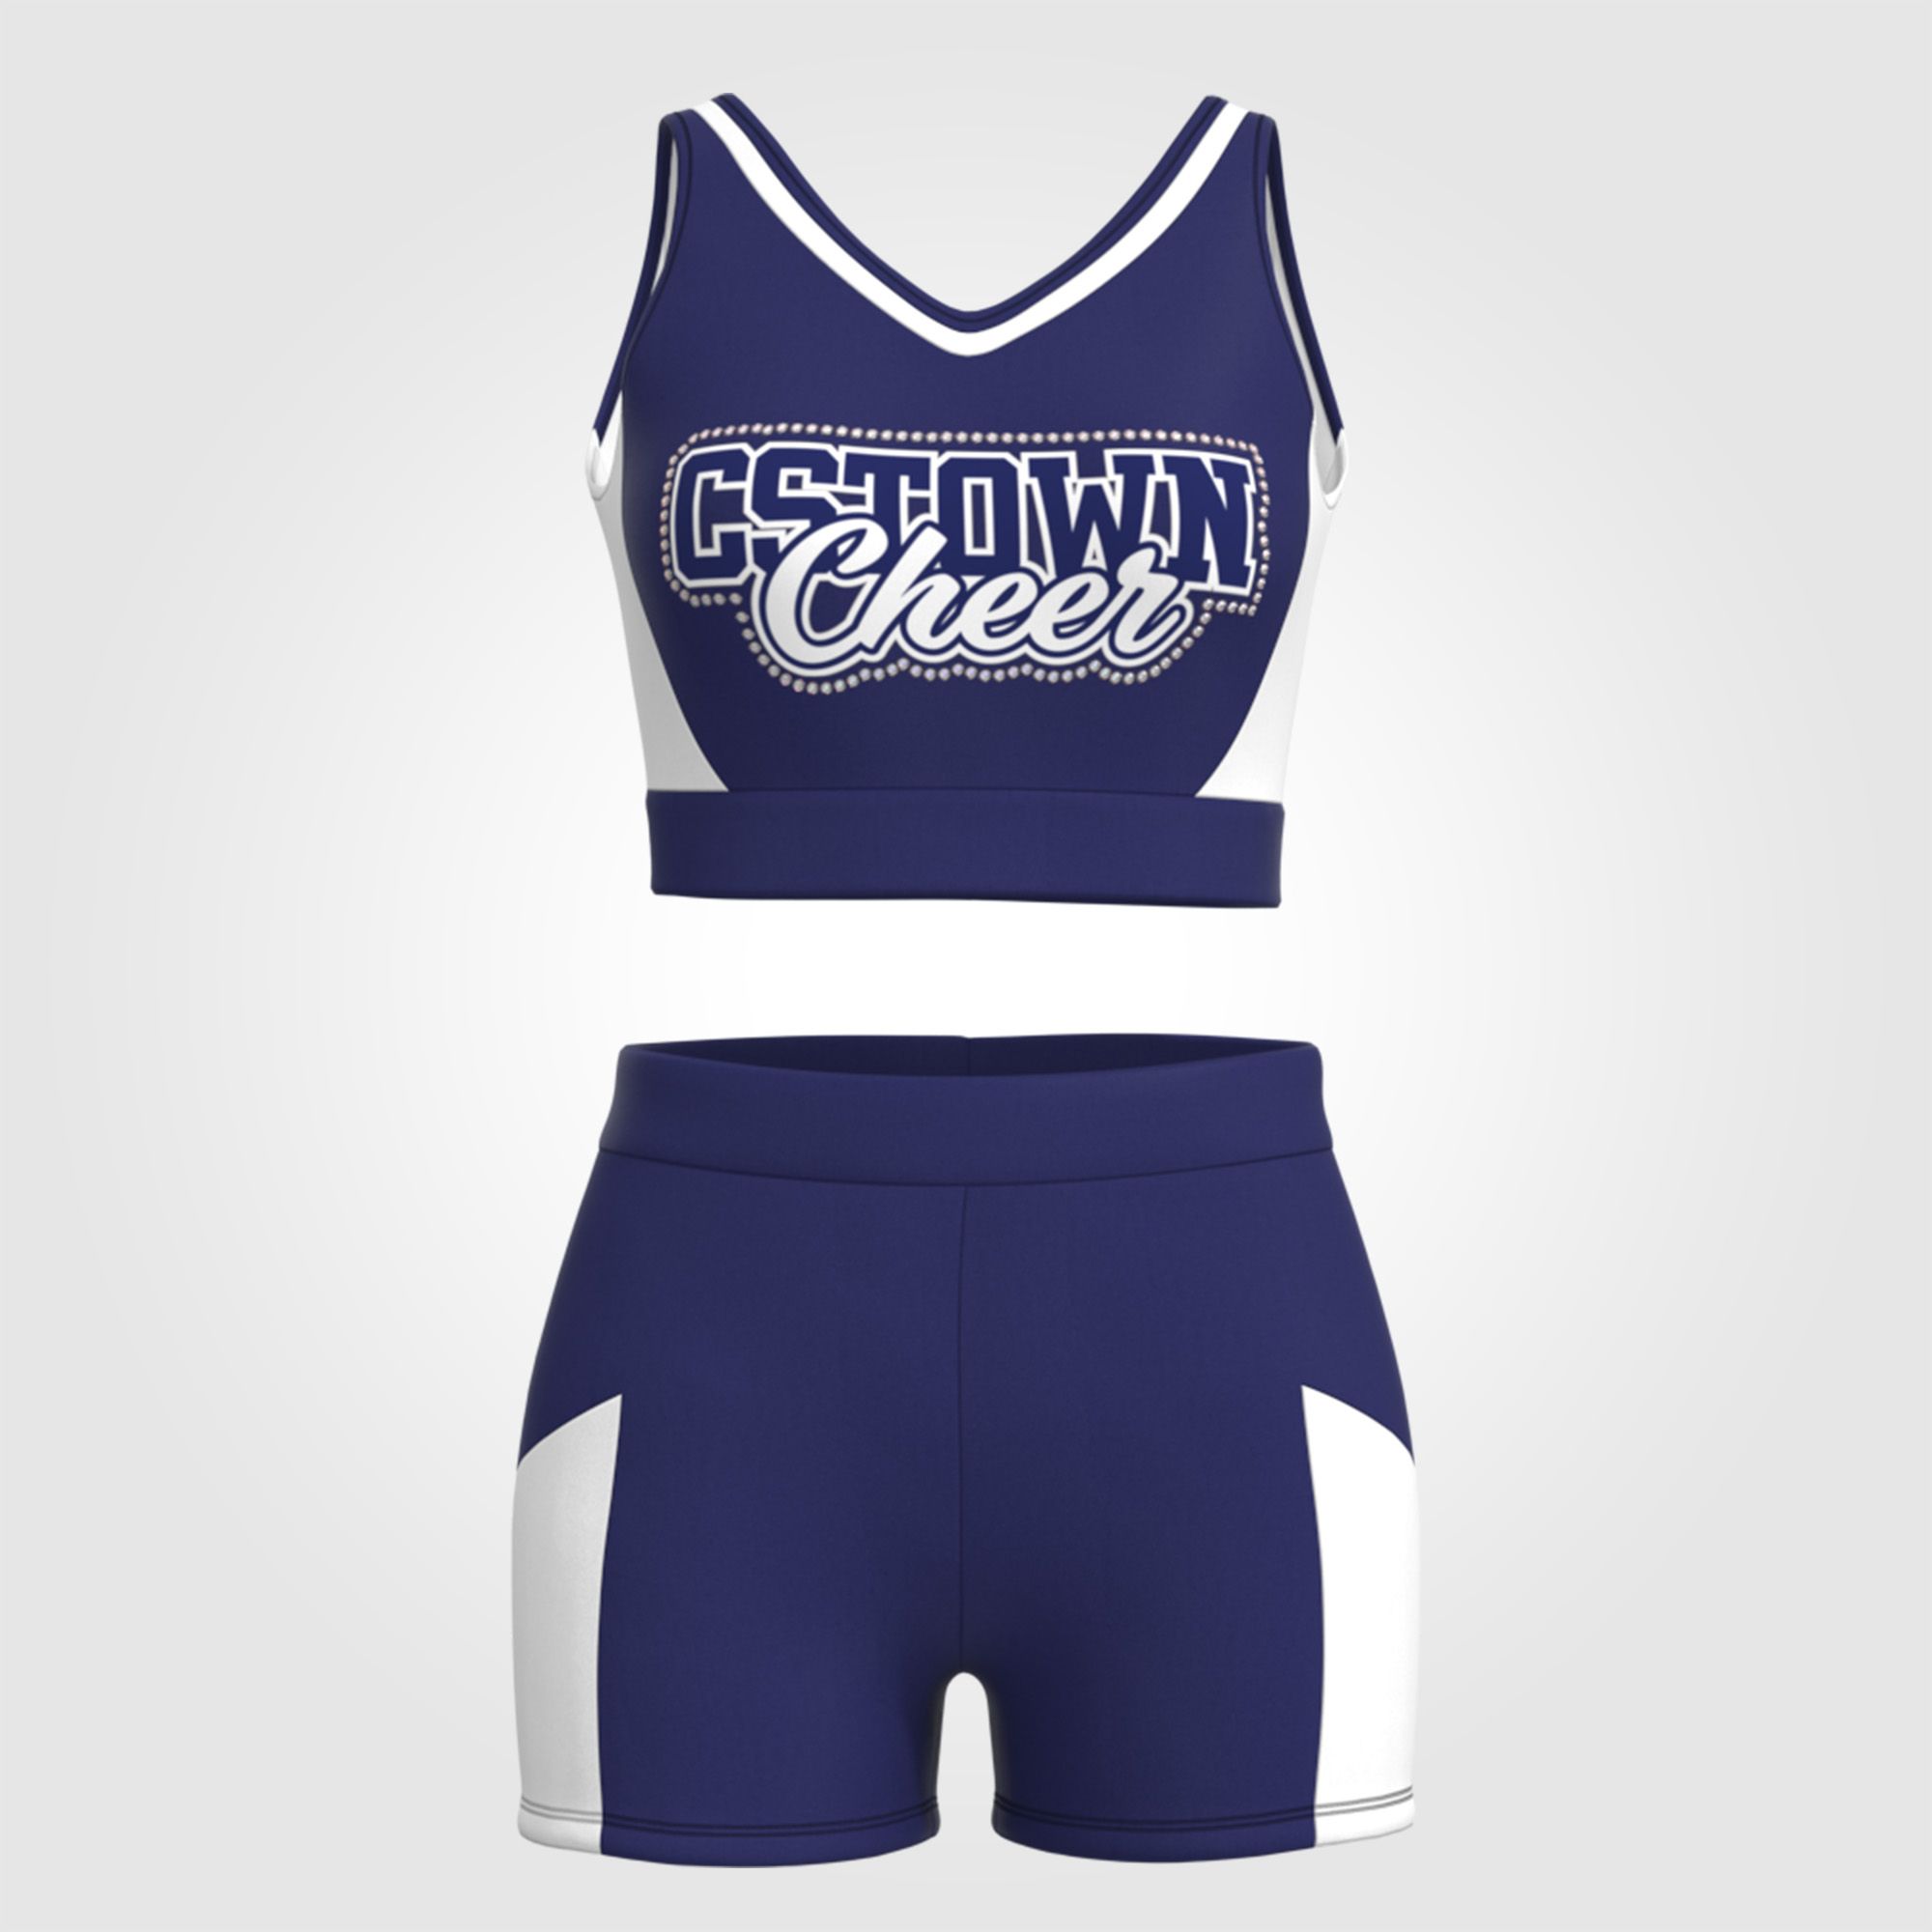 create your own youth cheer practice uniform